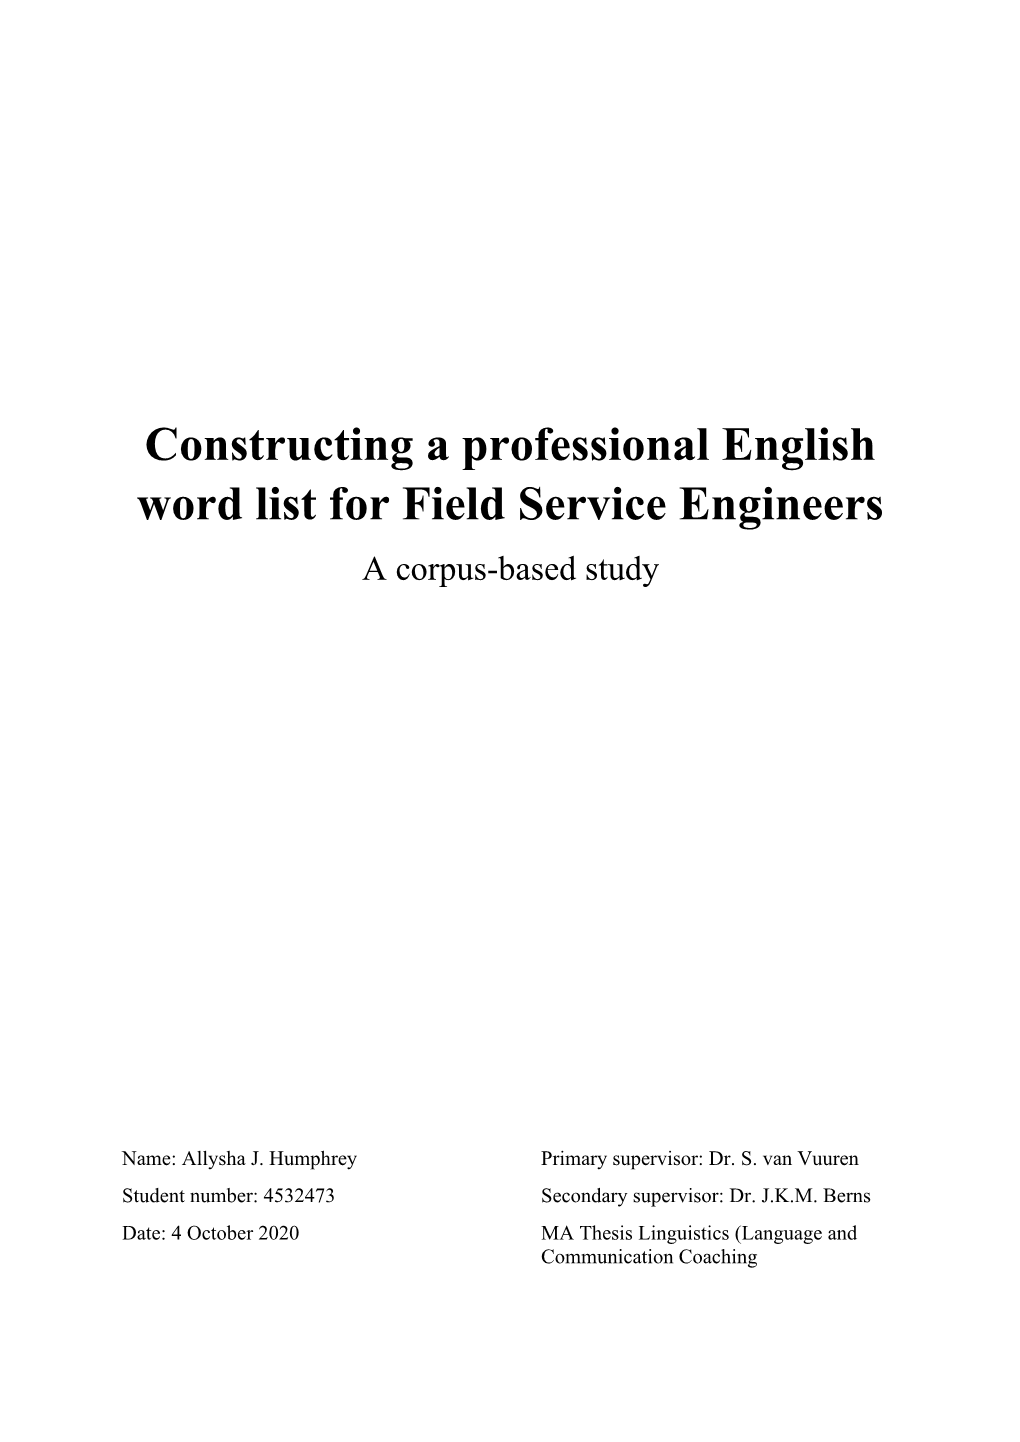 Constructing a Professional English Word List for Field Service Engineers a Corpus-Based Study